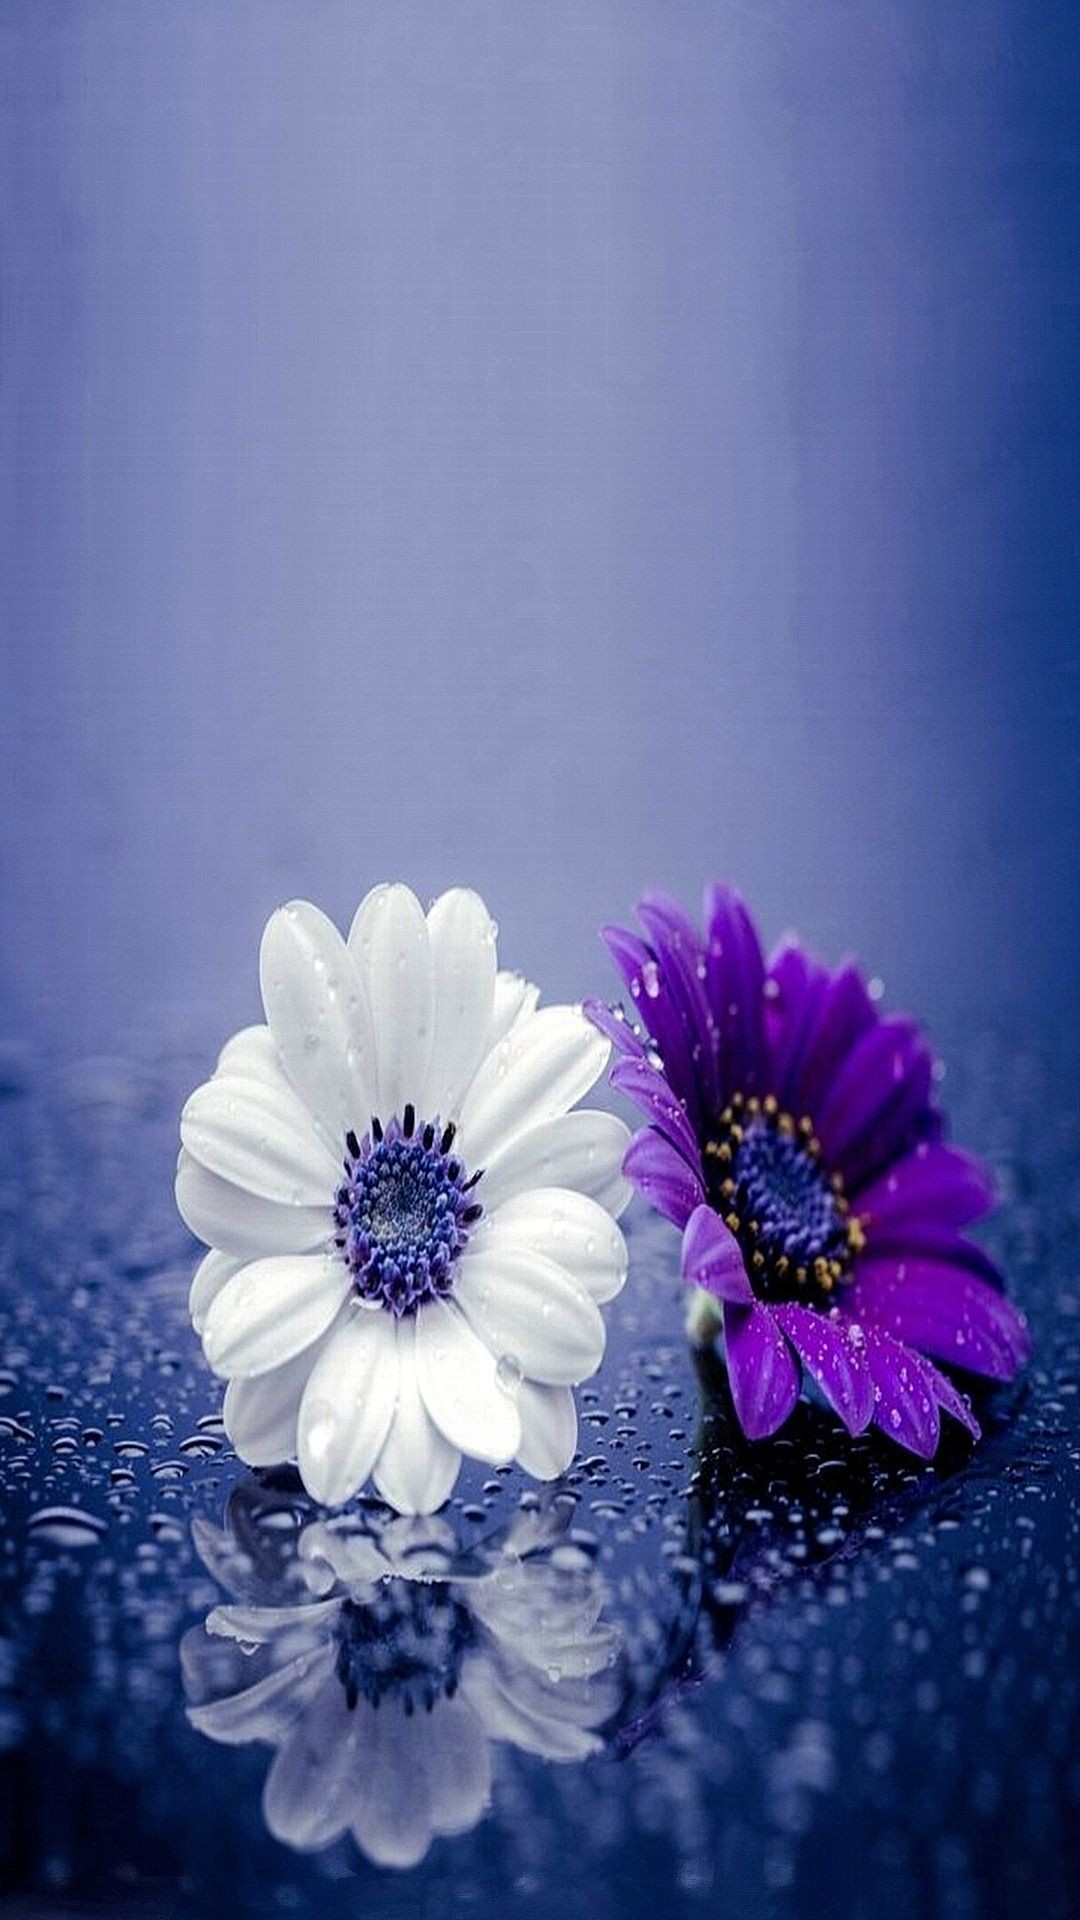 1080x1920 Nice flowers 1080 x 1920 Wallpapers available for free download.